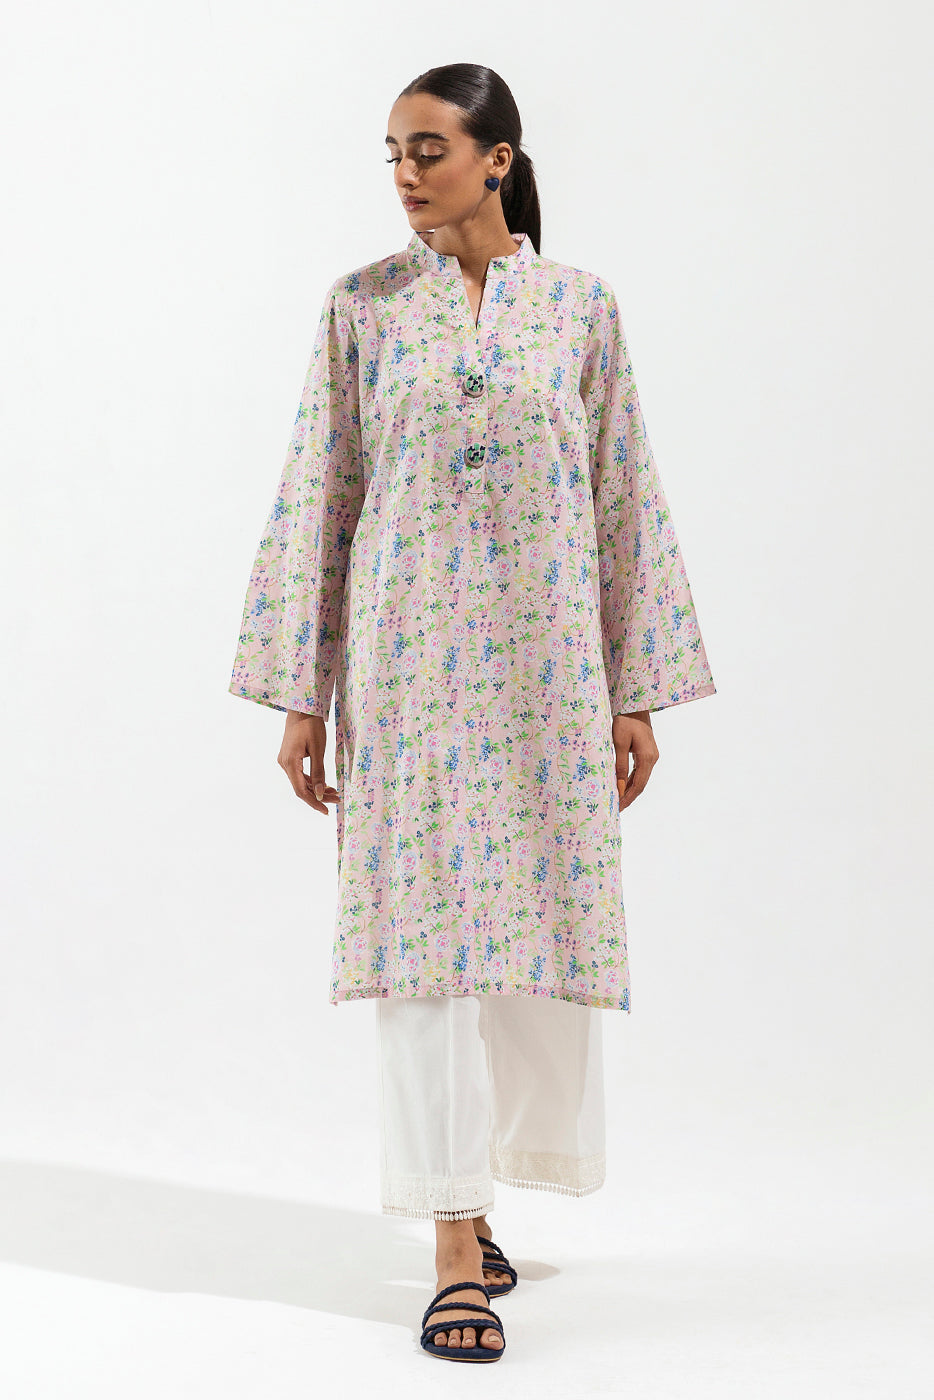 PRINTED LAWN SHIRT (PRET) - BEECHTREE